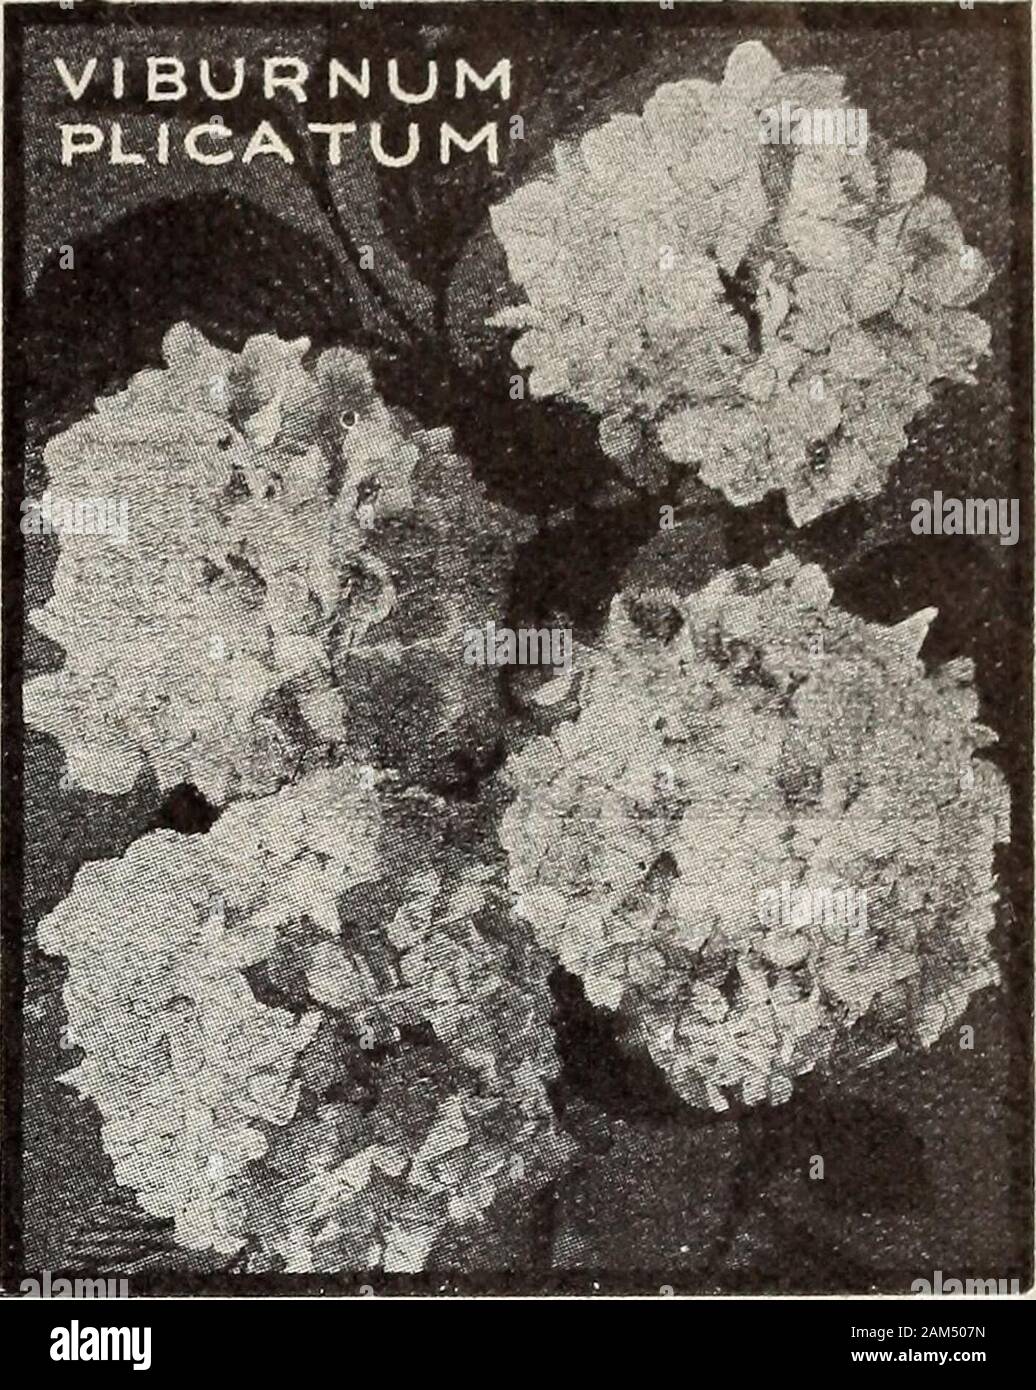 New floral guide : autumn 1913 . HARDY ORNAMENTAL SHRUBS, continuedSPIREAS VAN HOUTTEI. This graceful bush becomescovered in early sum-mer with snow-whiteflowers, like illustra-tion. The foliage isattractive always. PRUNIFOLIA (BridalWreath). Bearsmasses of snow-whiteflowers, like littleroses, almost the en-tire length of thebranches. ANTHONY WATERER.Rosy red flowers,borne in large, flatclusters all summer.Grows low and com-pact. VIBURNUM PLICATUM (Japan Snowball). Pure white,globular flowers like real balls of snow. The foliage is rich,dark green and finely crinkled. 15 cts. each, postpaid; 2 Stock Photo